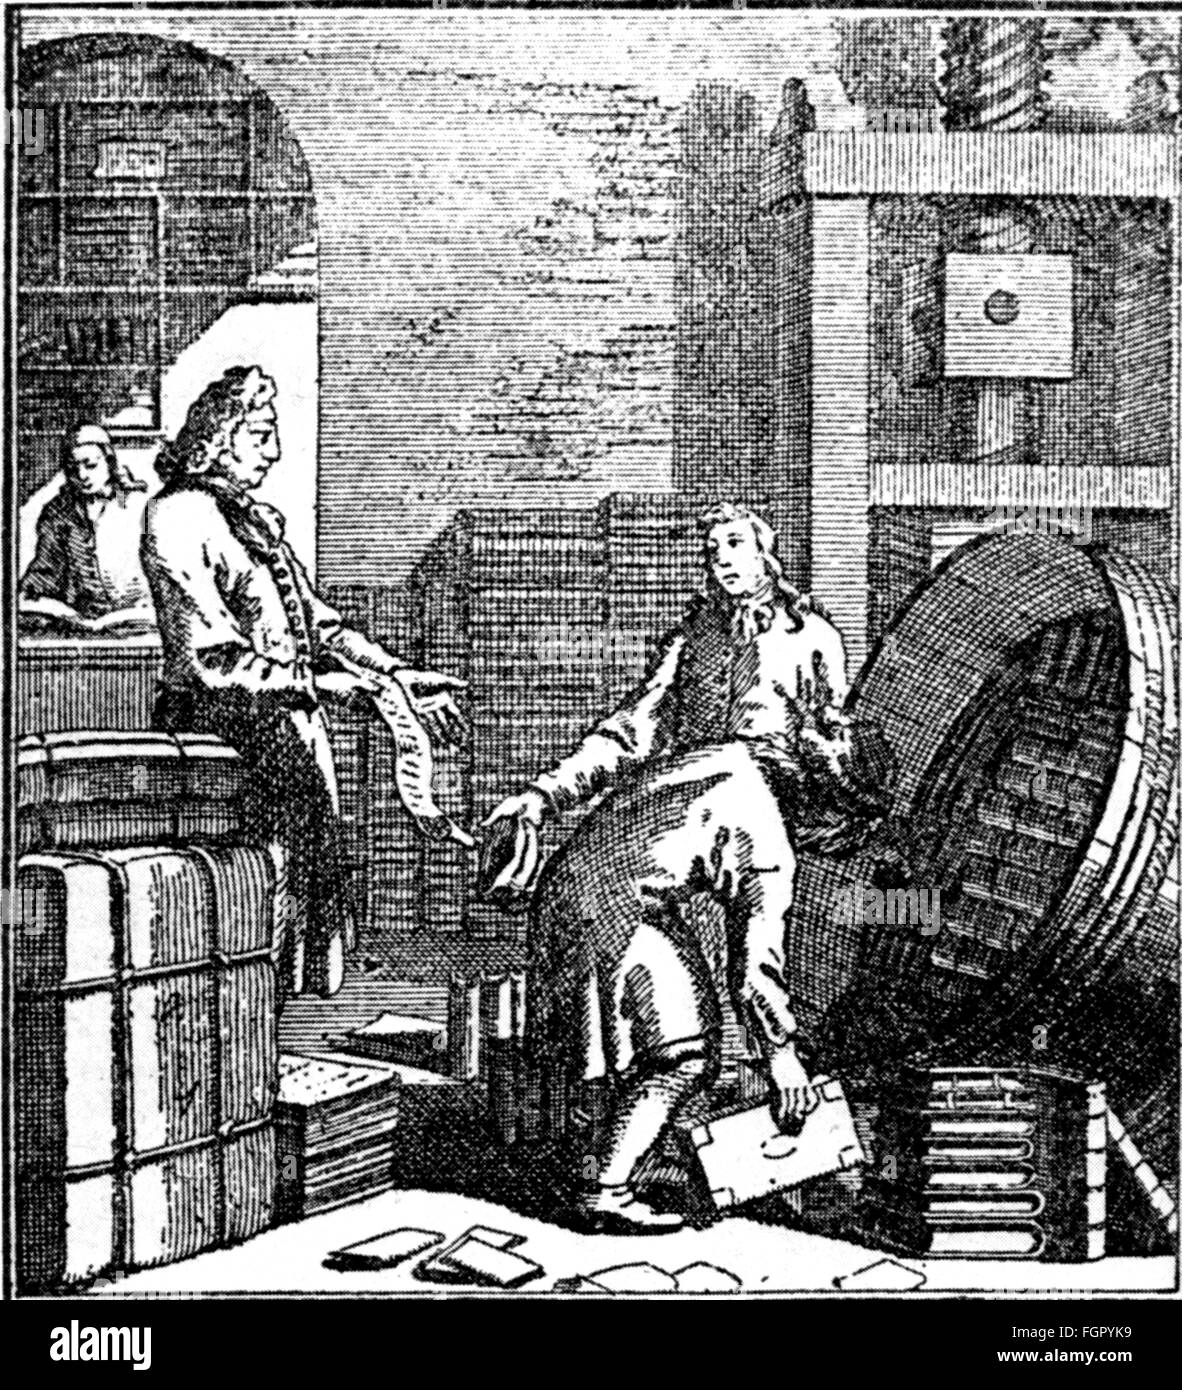 trade,transportation of goods,dispatching of books in a barrel,woodcut,18th century,18th century,graphic,graphics,book trade,bookselling,bookseller,booksellers,dispatch of goods,delayed dispatch,dispatch,despatch,dispatchment,convey,conveying,book,books,barrel,pack,packing,transport,merchant,merchants,assistant,assistants,half length,standing,printing press,press,presses,printed publication,printed publications,piece of printed matter,pieces of printed matter,print,printings,woodcut,woodcuts,historic,historical,male,,Additional-Rights-Clearences-Not Available Stock Photo